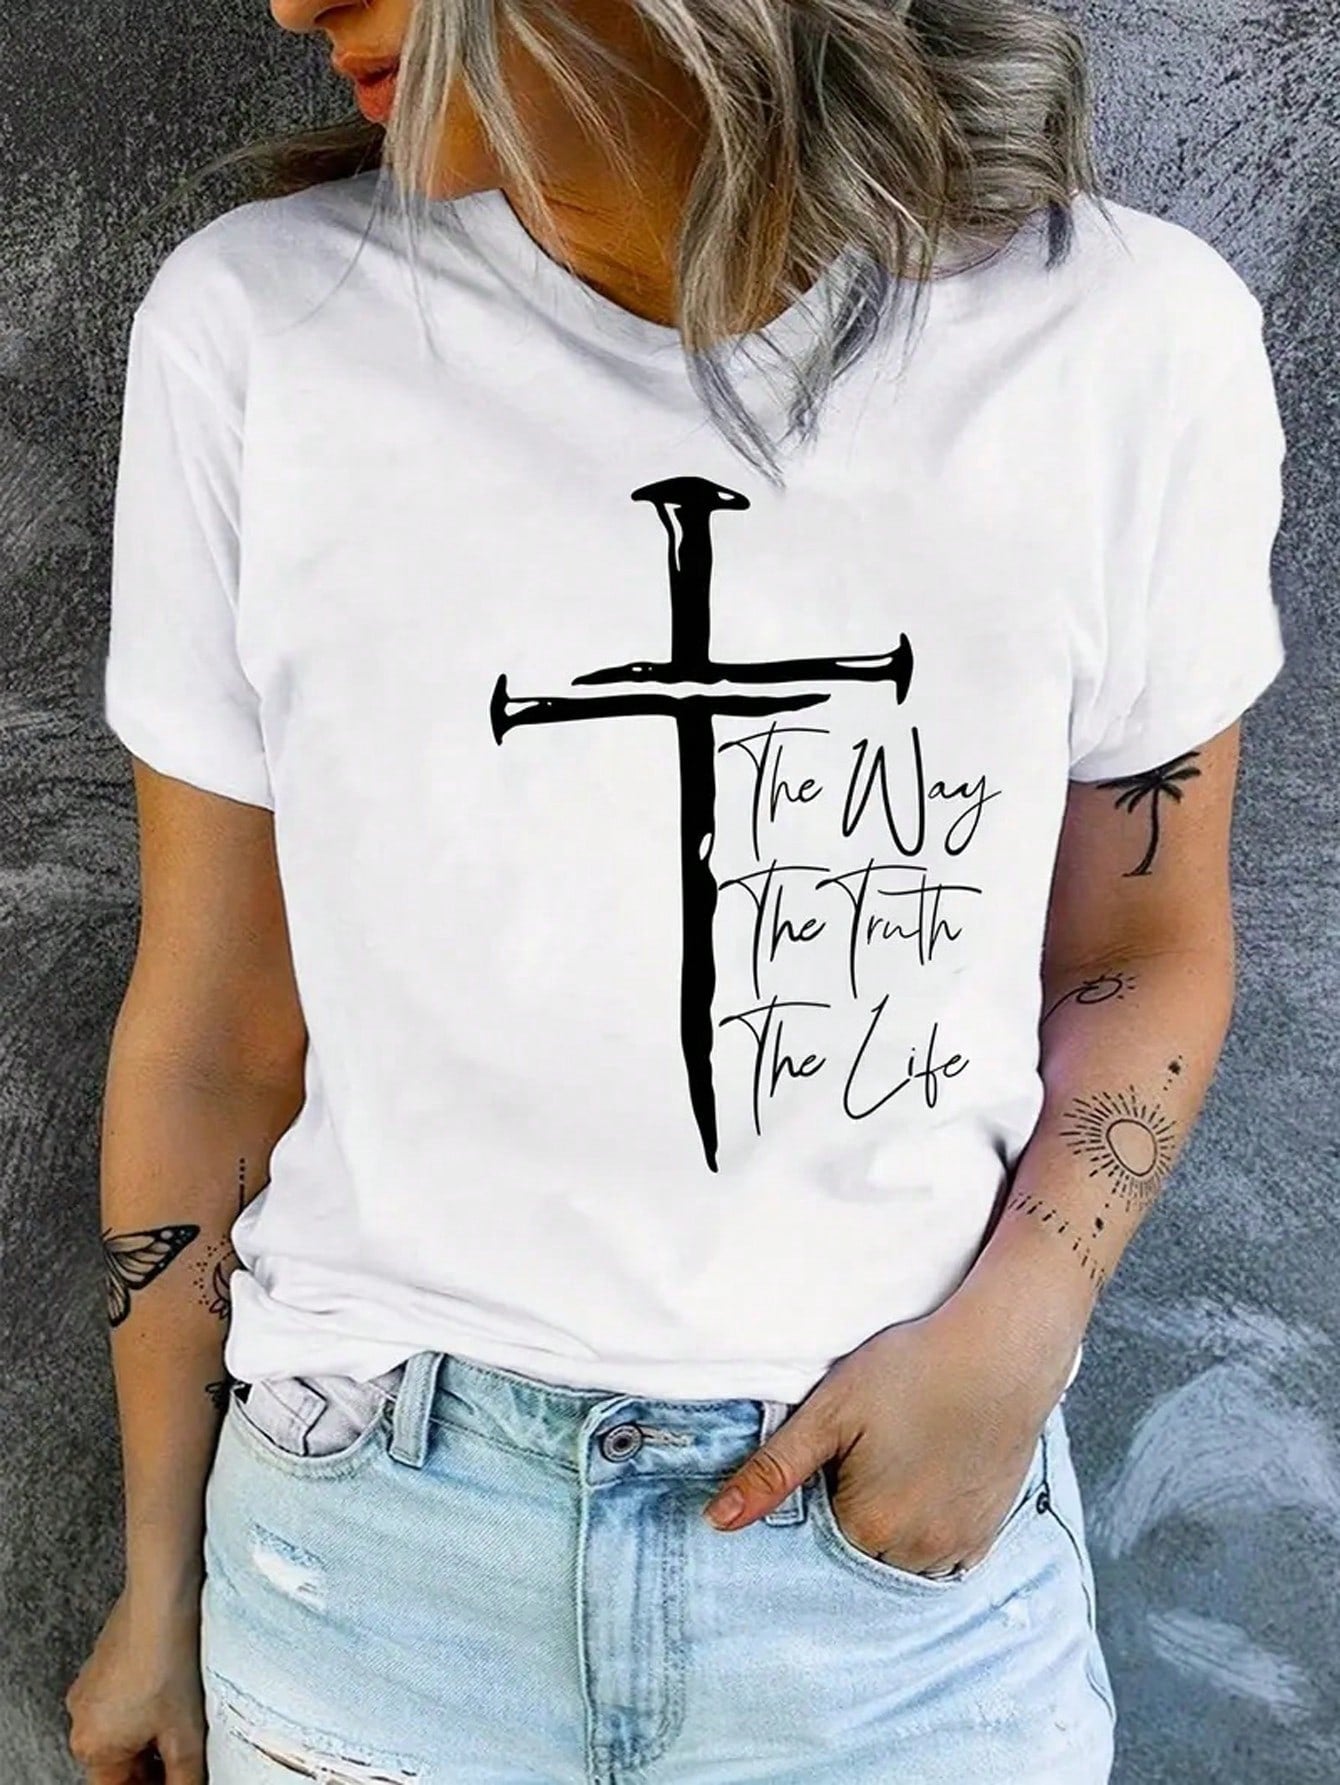 Cross & Letter Graphic TeeCross & Letter Graphic Tee
Color: White
Style: Casual
Pattern Type: Figure, Letter
Neckline: Round Neck
Sleeve Type: Regular Sleeve
Sleeve Length: Short Sleeve
Length: Regular
Fit Type: RegulClothingLive Online MallLive Online MallCross & Letter Graphic Tee